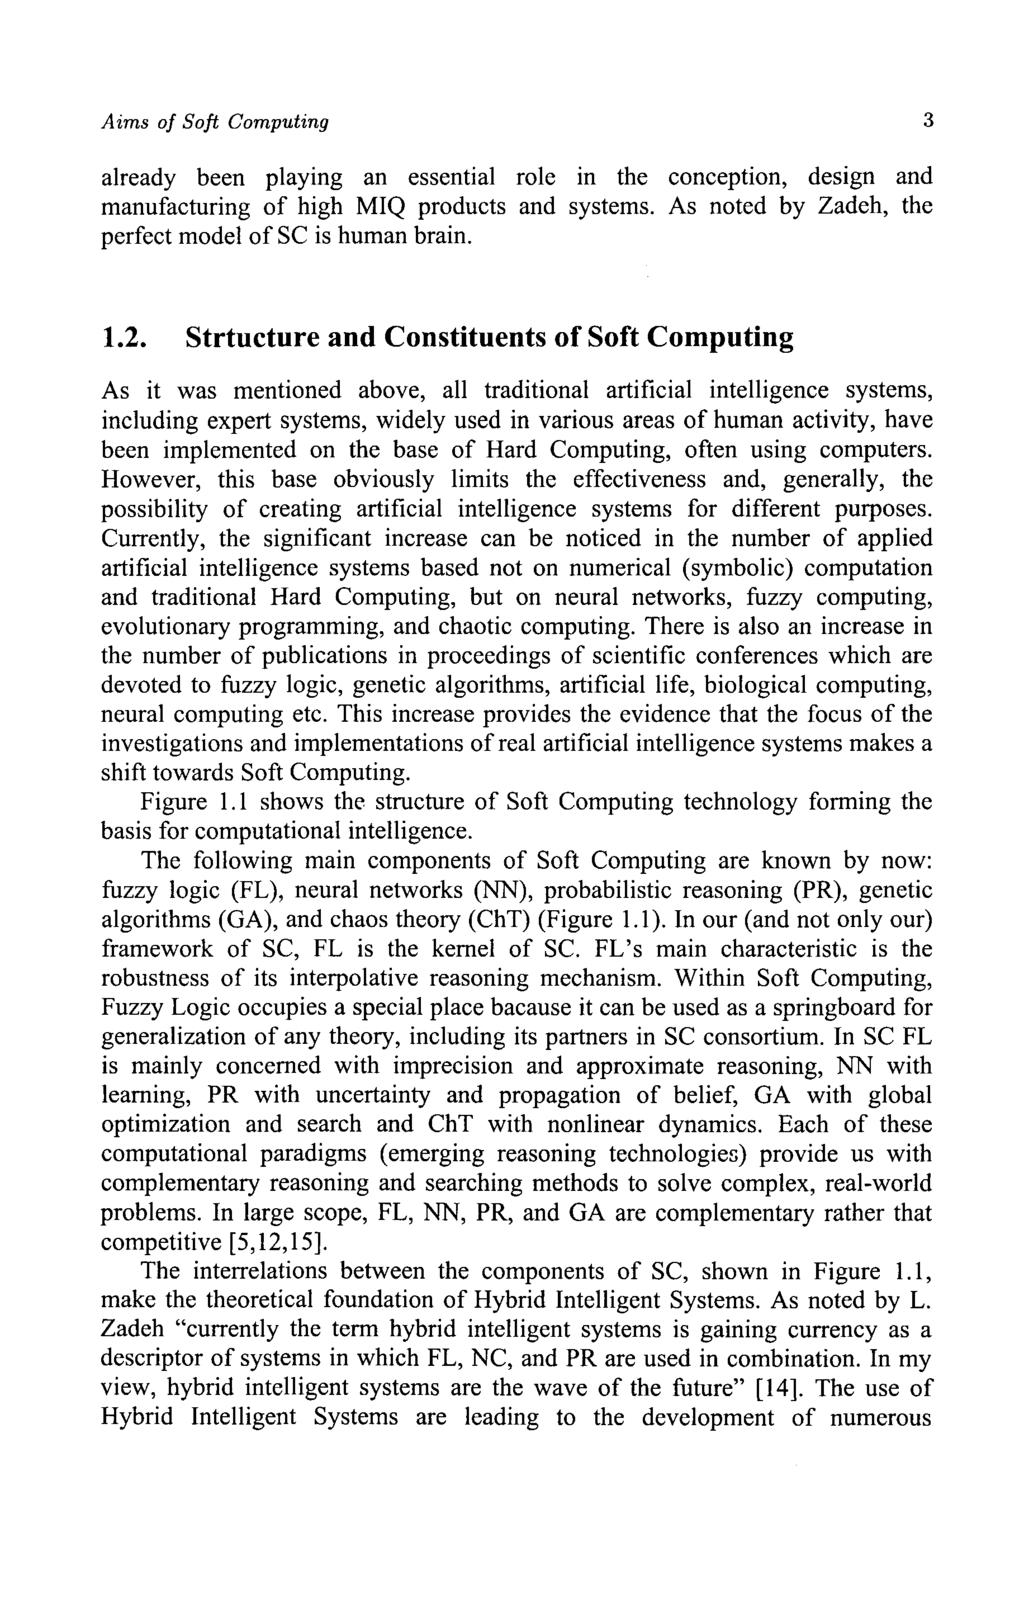 Aims of Soft Computing 3 already been playing an essential role in the conception, design and manufacturing of high MIQ products and systems. As noted by Zadeh, the perfect model of SC is human brain.